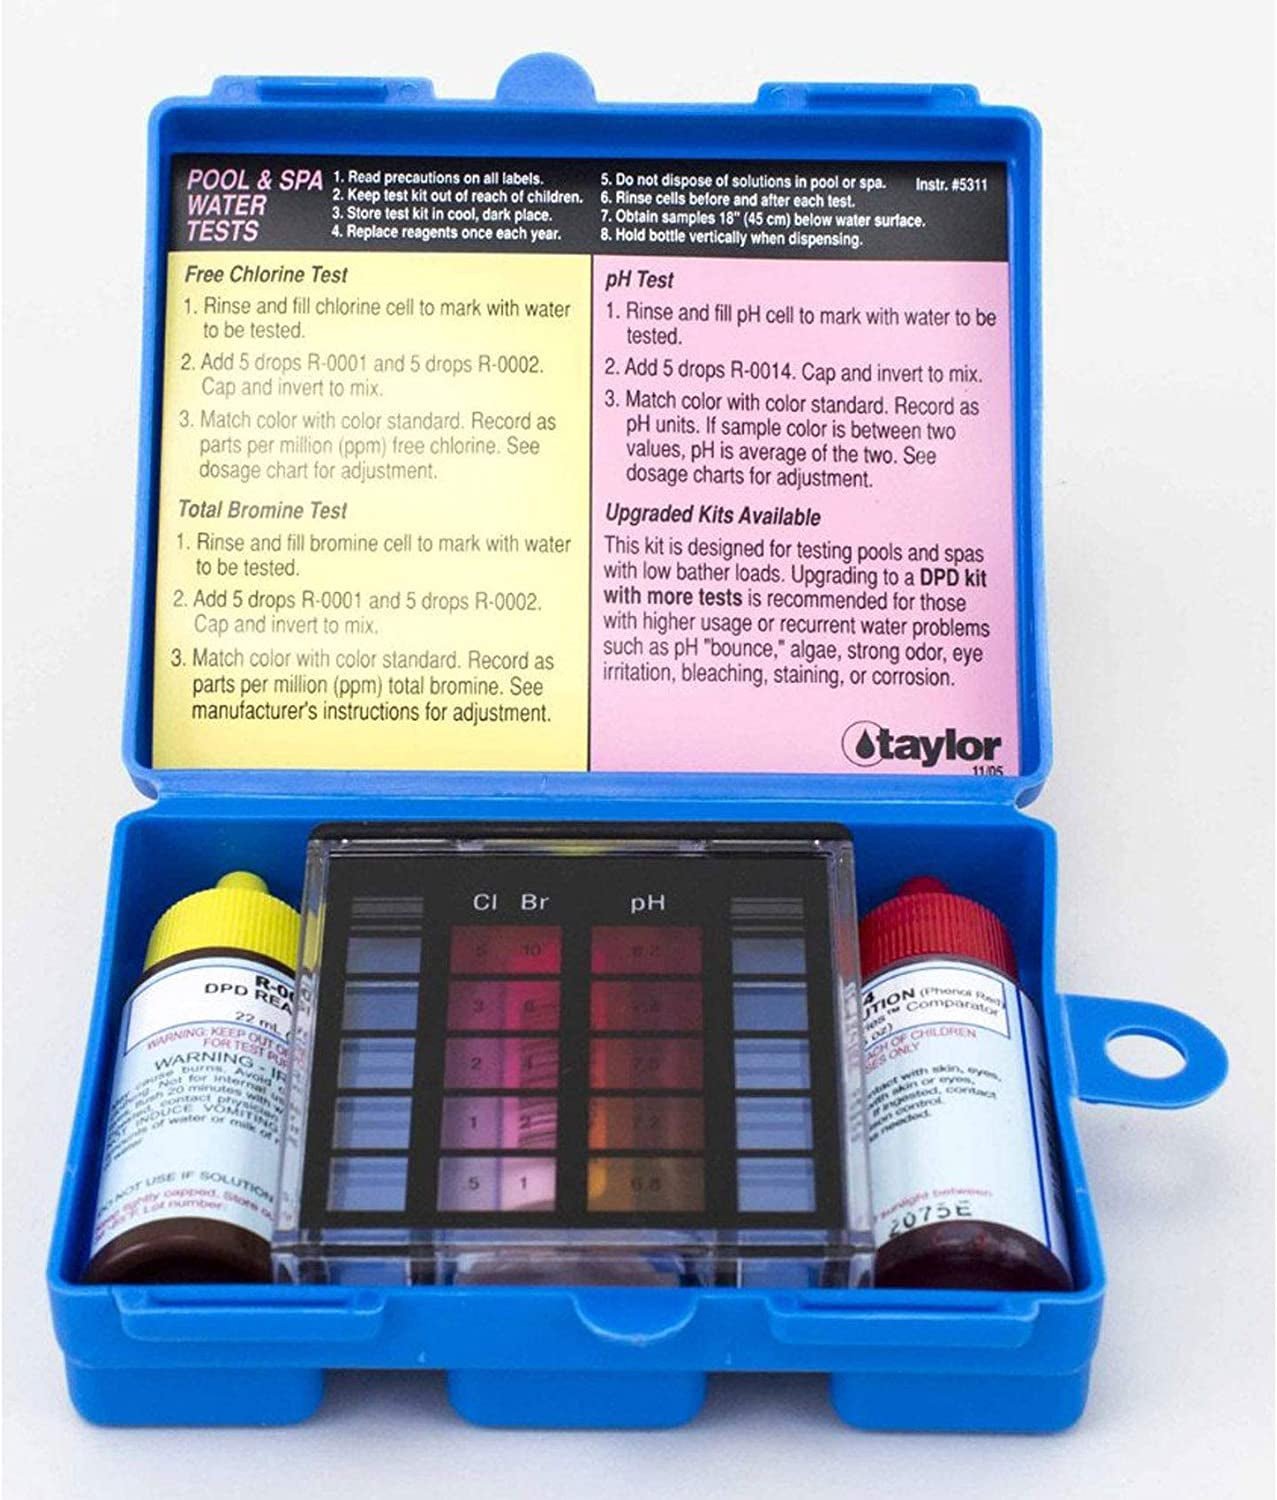 K-1000 Taylor 3-Way Residential Test Kit for Total Chlorine, Bromine, pH (OTO)